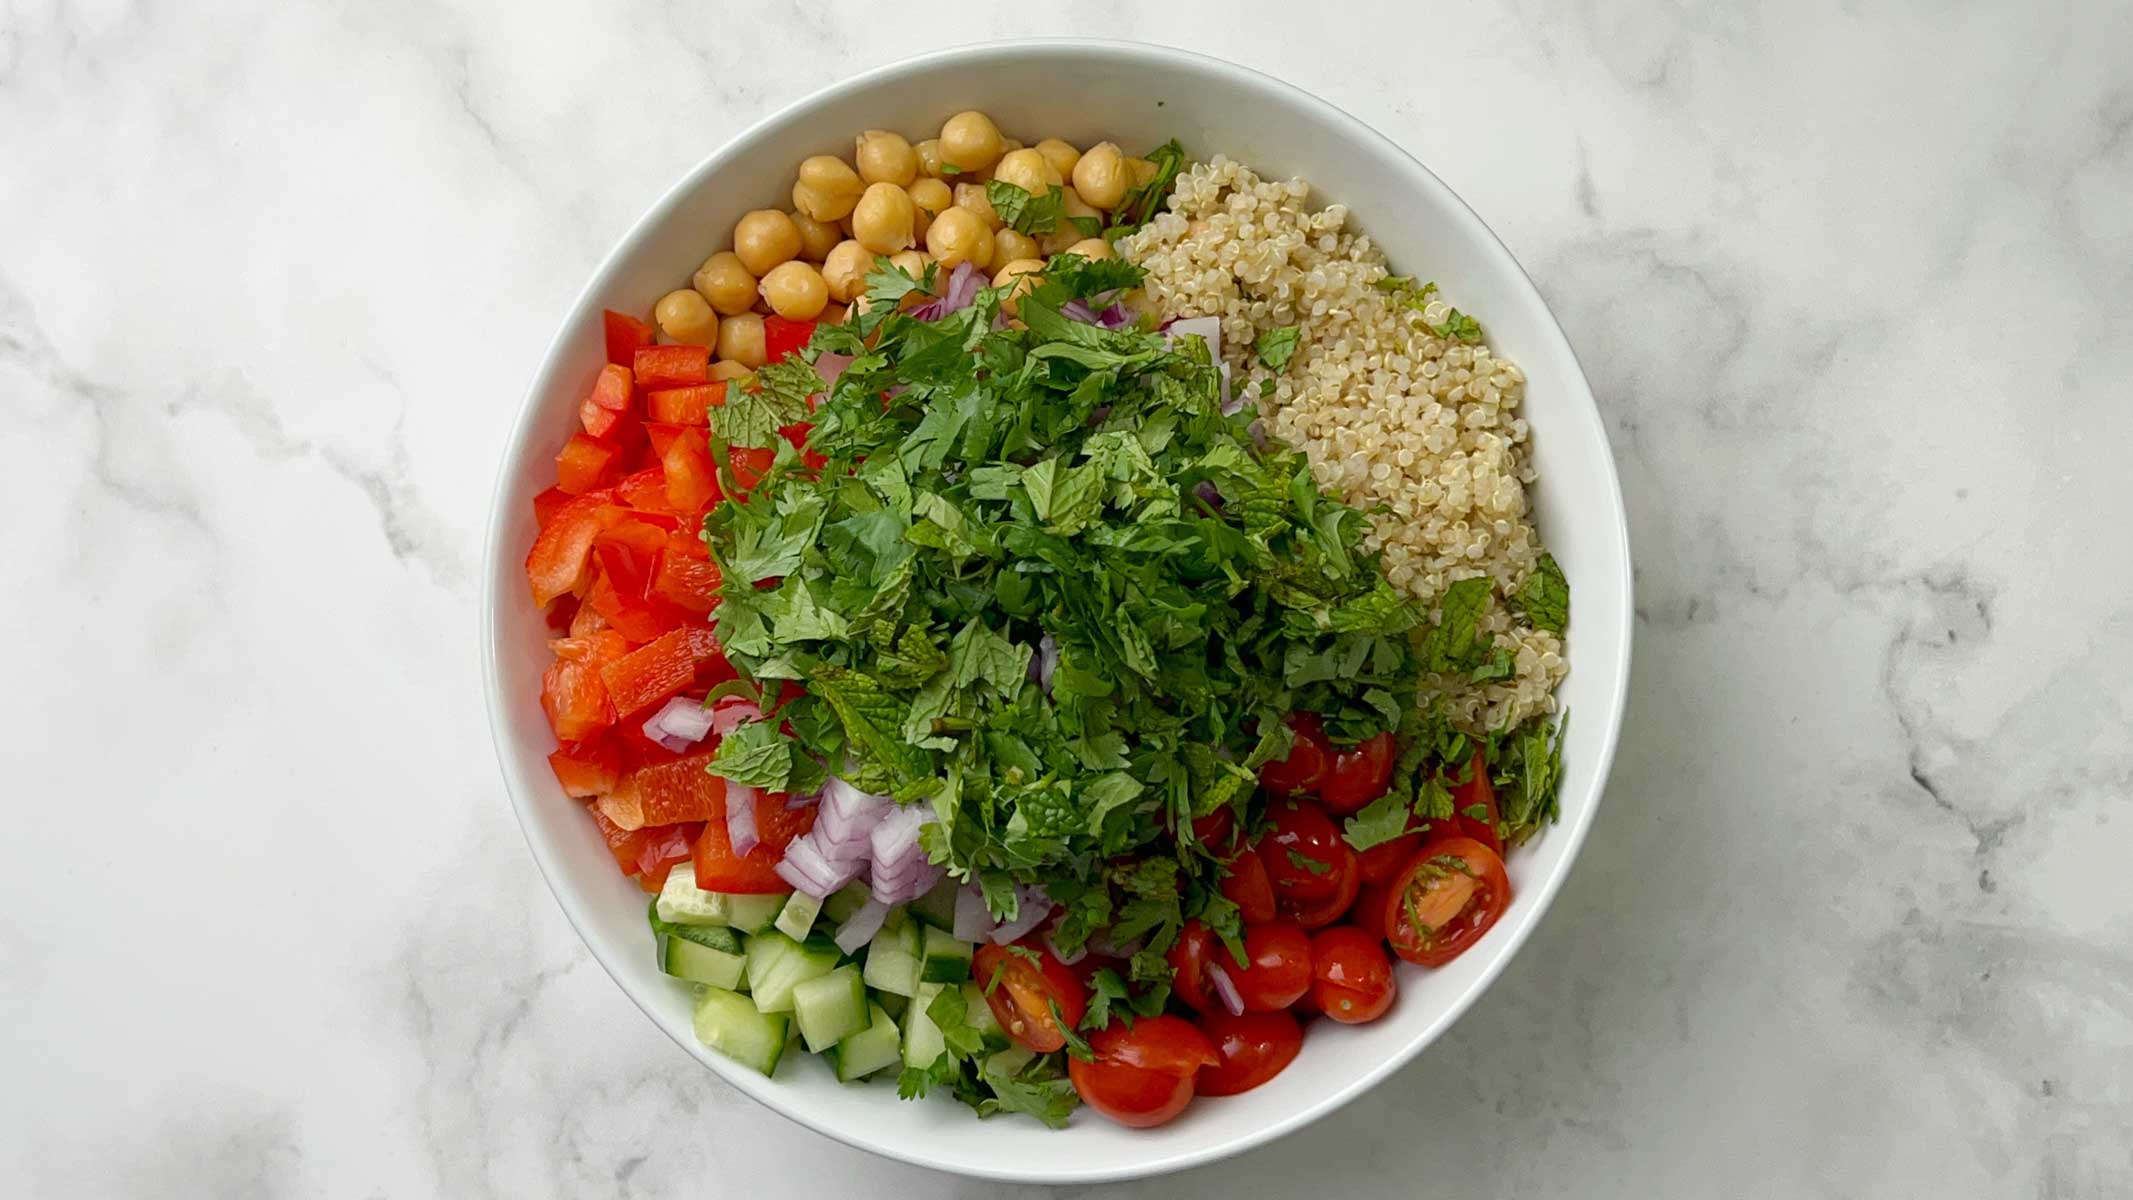 step to plave all the salad ingredients in a mixing bowl